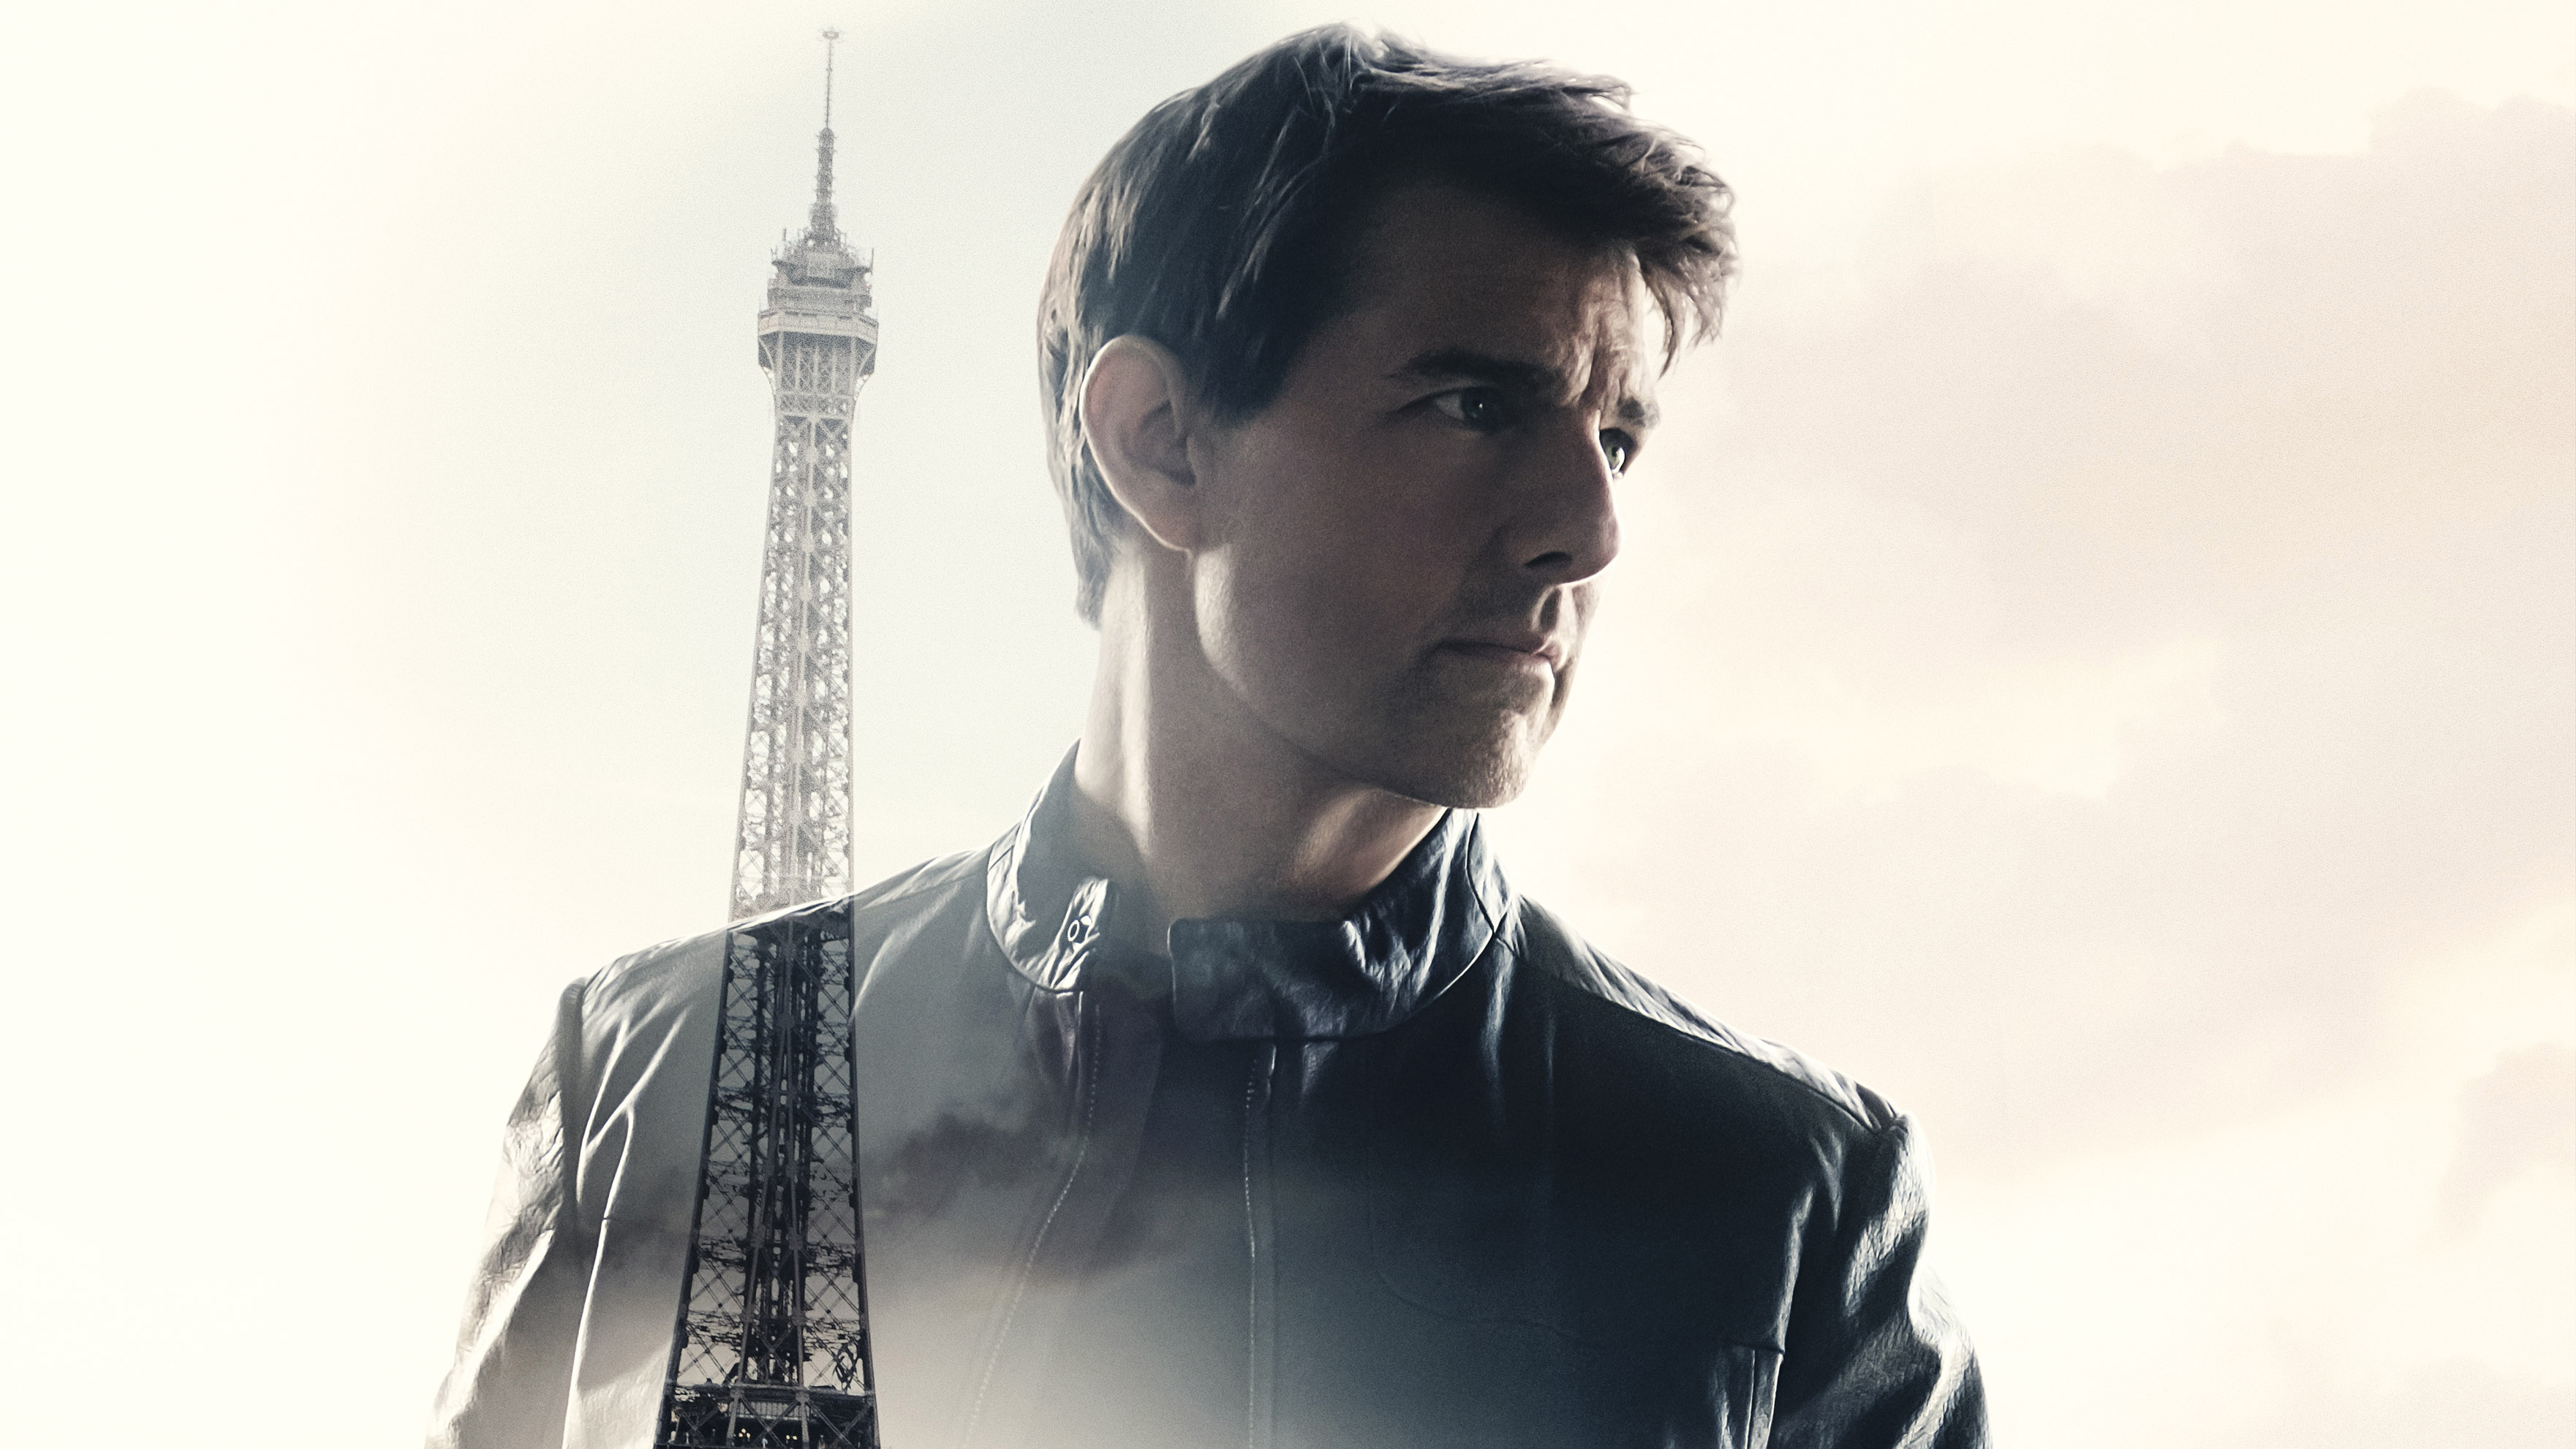 Mission impossible 4 hd movie download